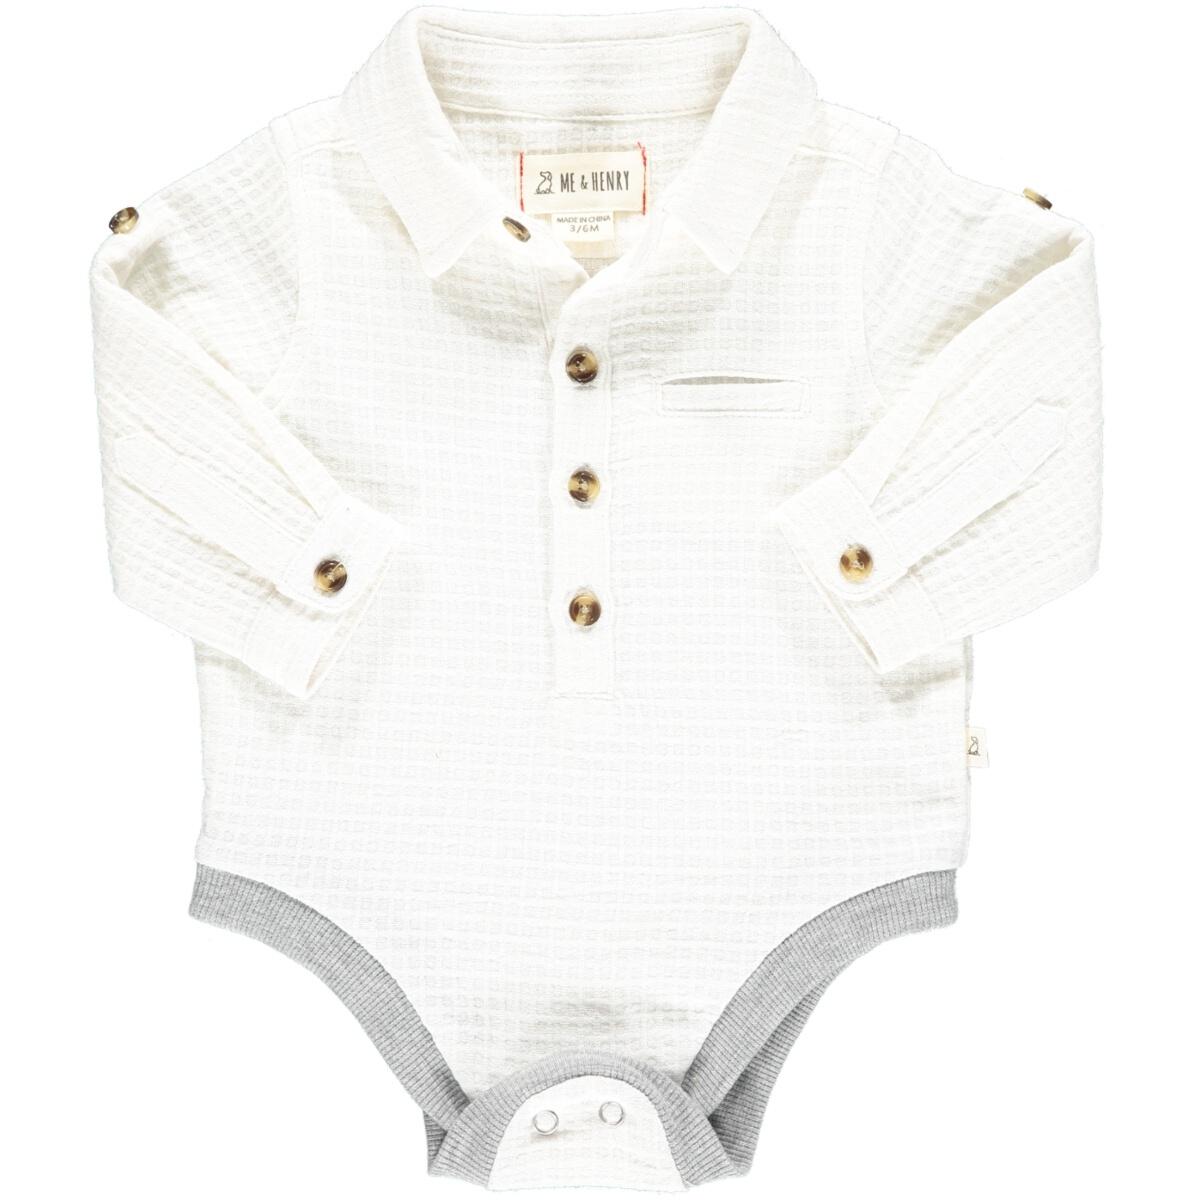 Me & Henry - Cache couche chemise, blanche